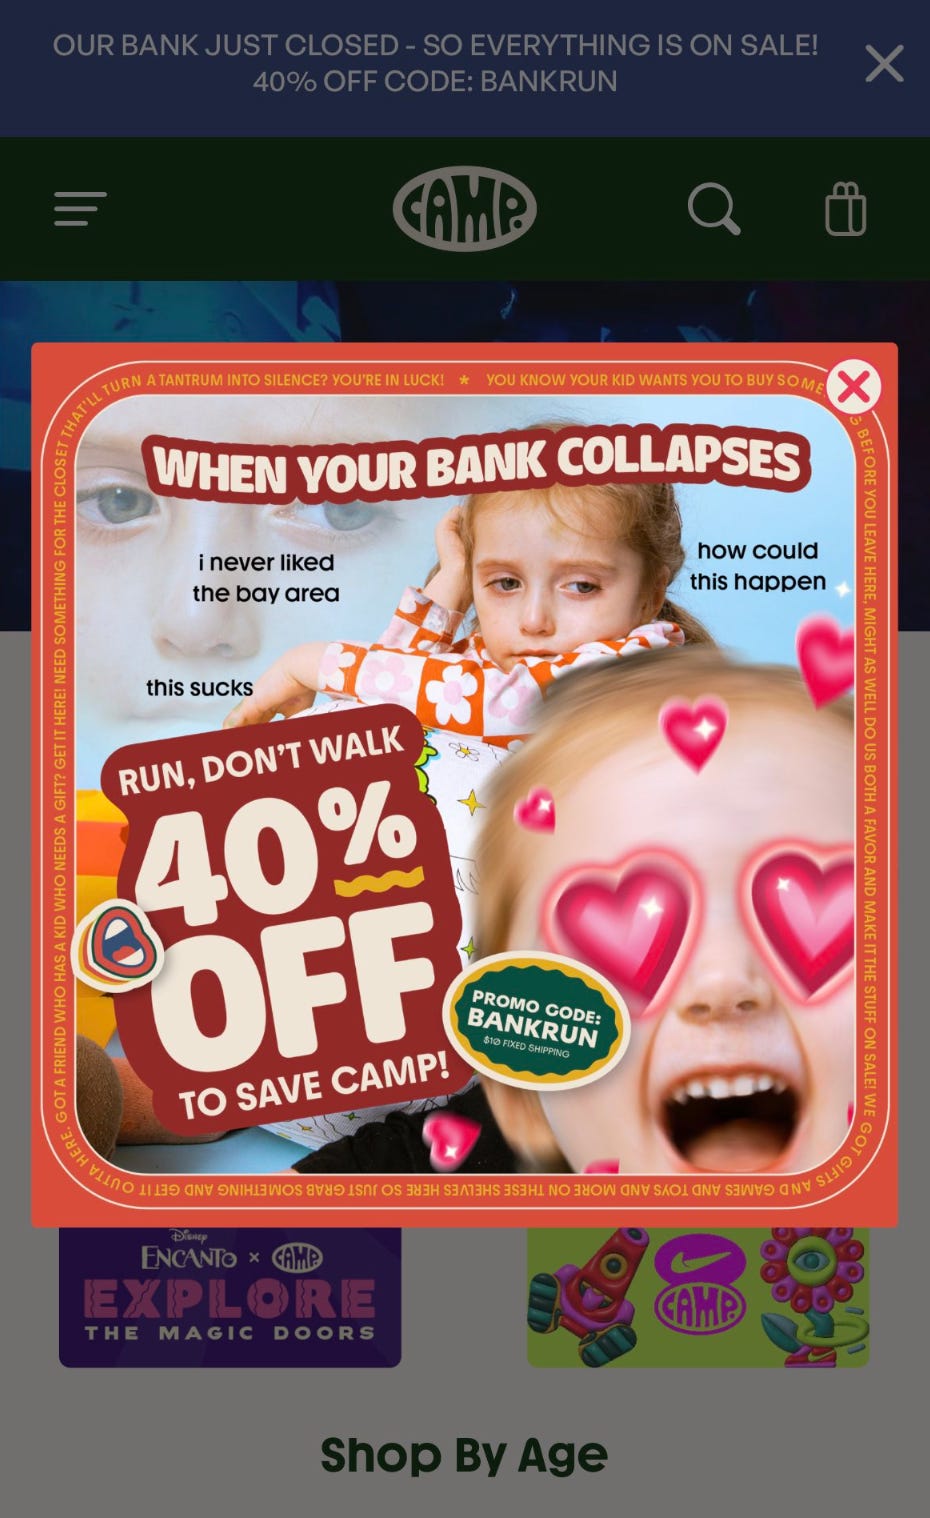 The landing page for Camp.com on Saturday, 10 March. The company needed to urgently generate cash to continue operations, with its bank having gone under the previous day.